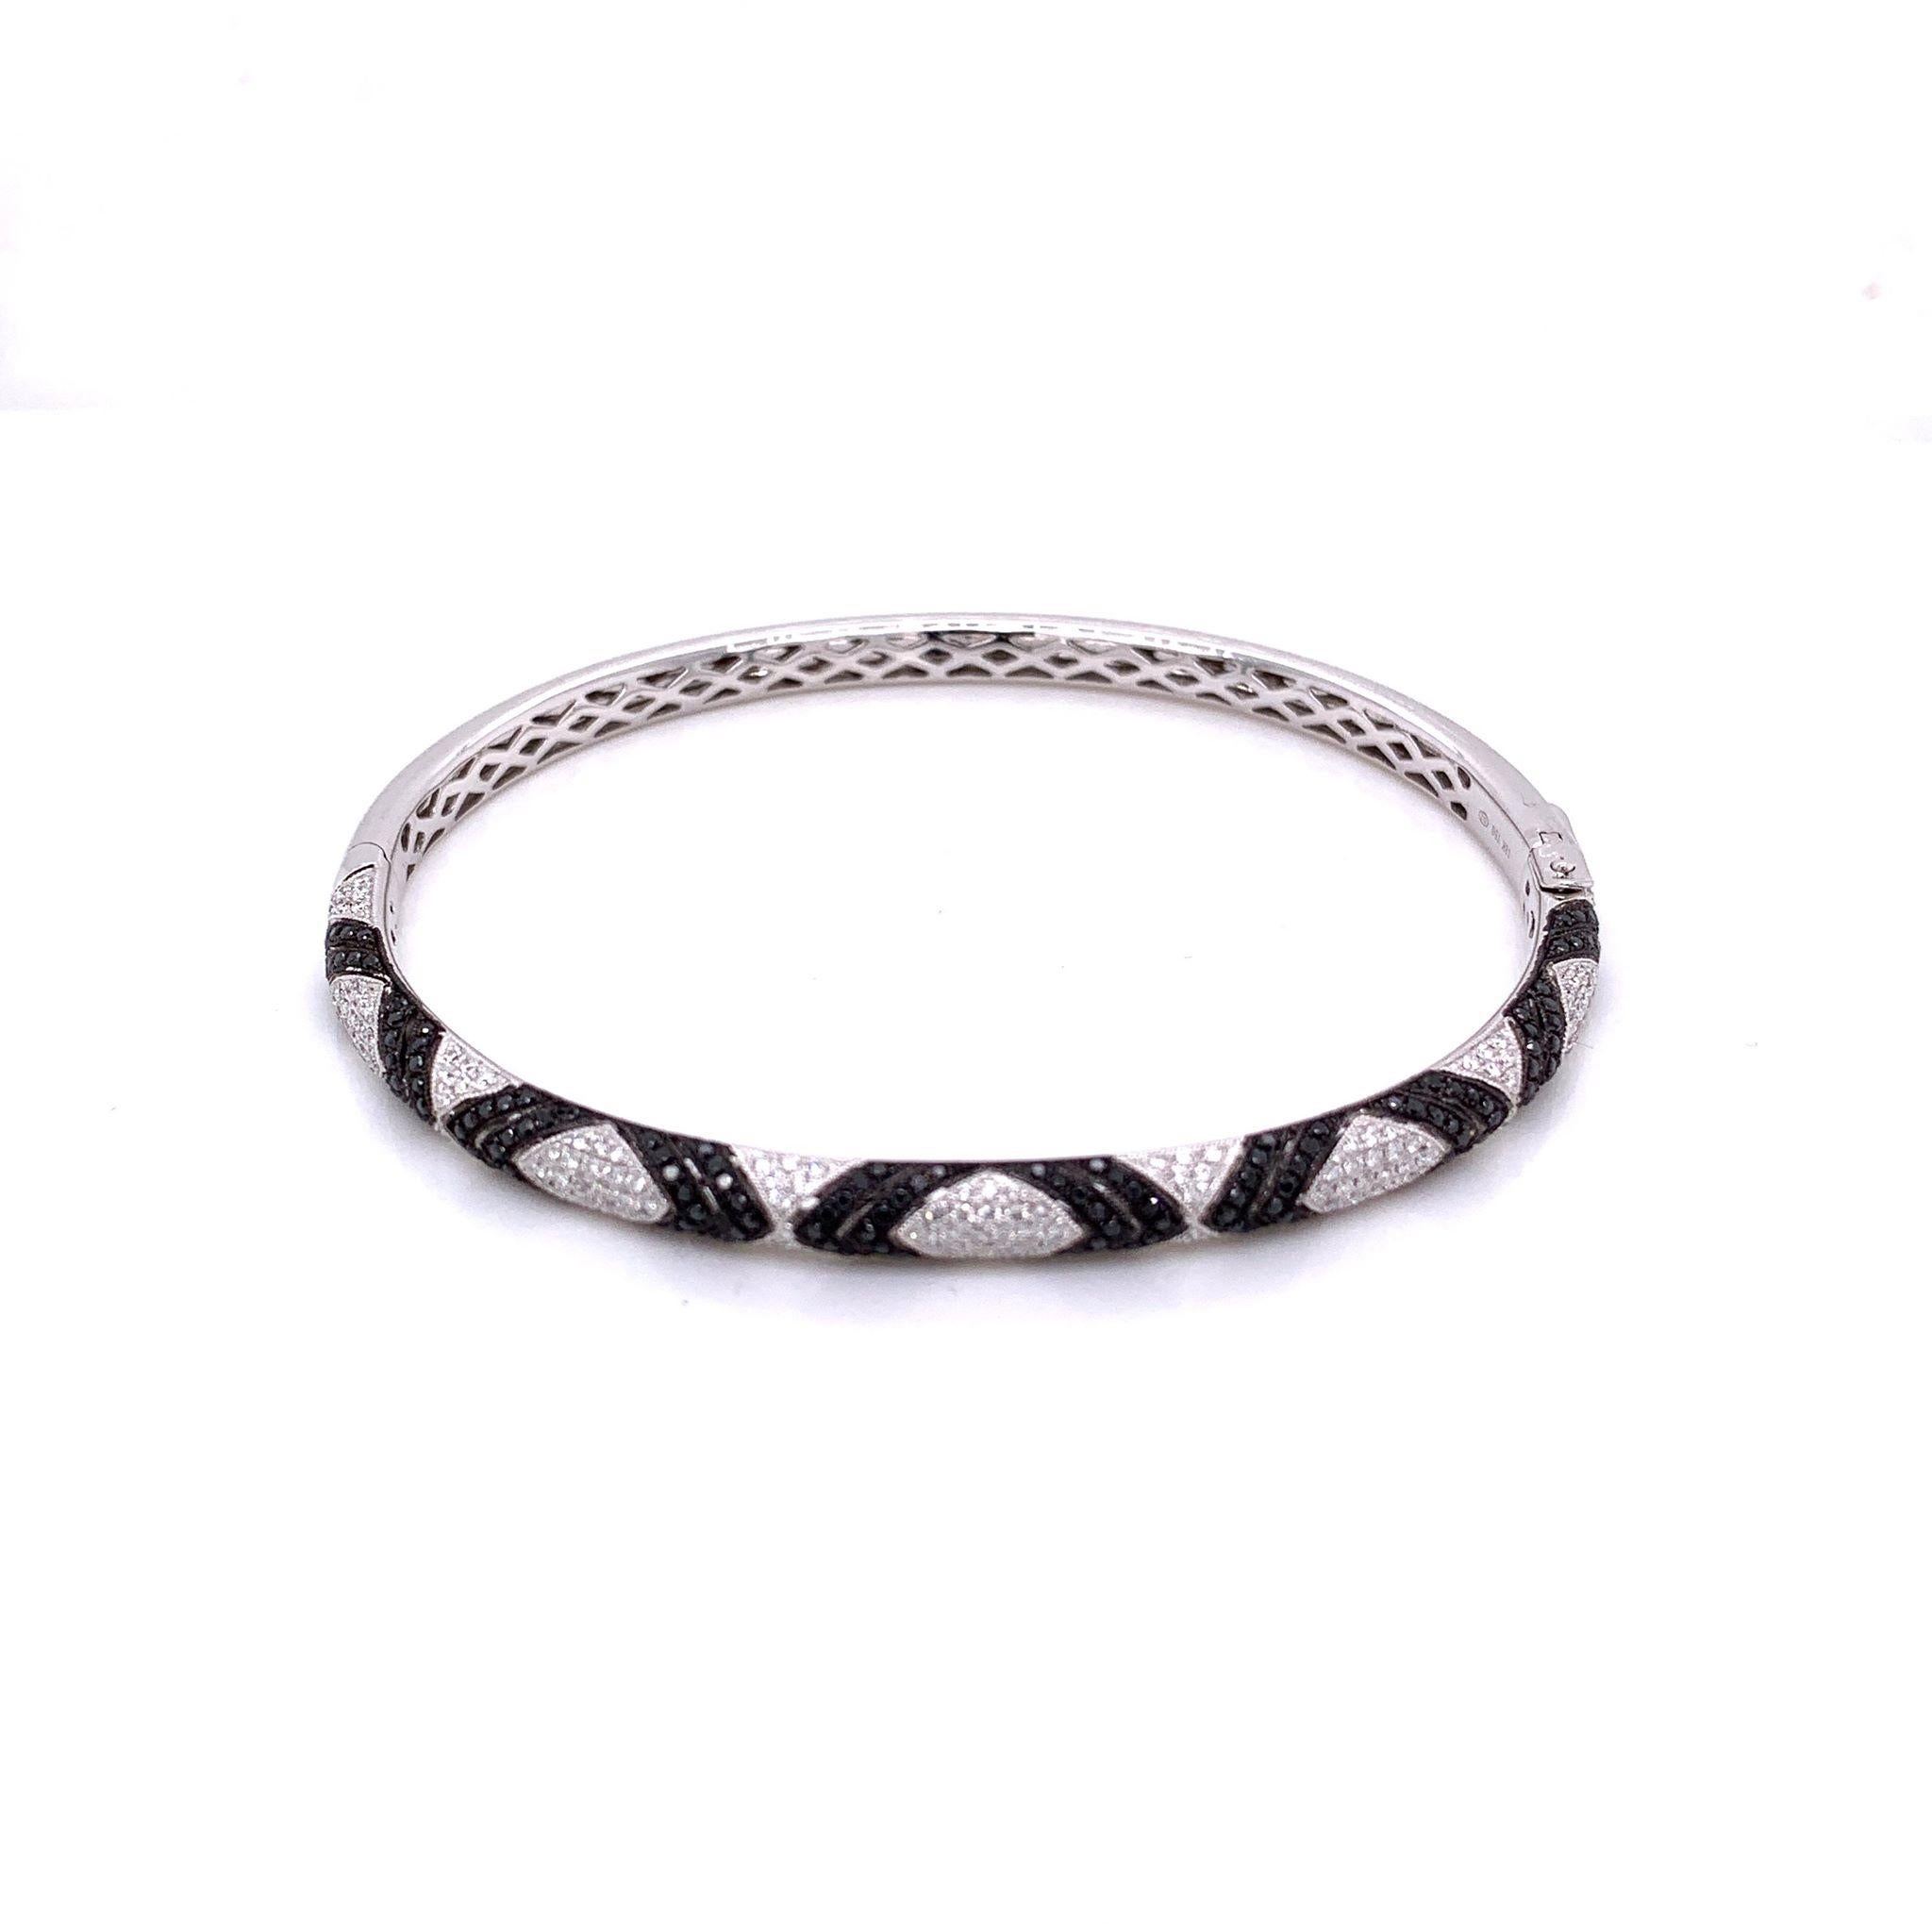 A lovely bracelet that can we worn every day. This piece features 0.66 carats of round cut white diamonds along with 0.60 carats of black diamonds. The light and dark colored diamonds add great contrast and made a pattern in their placement. Set in